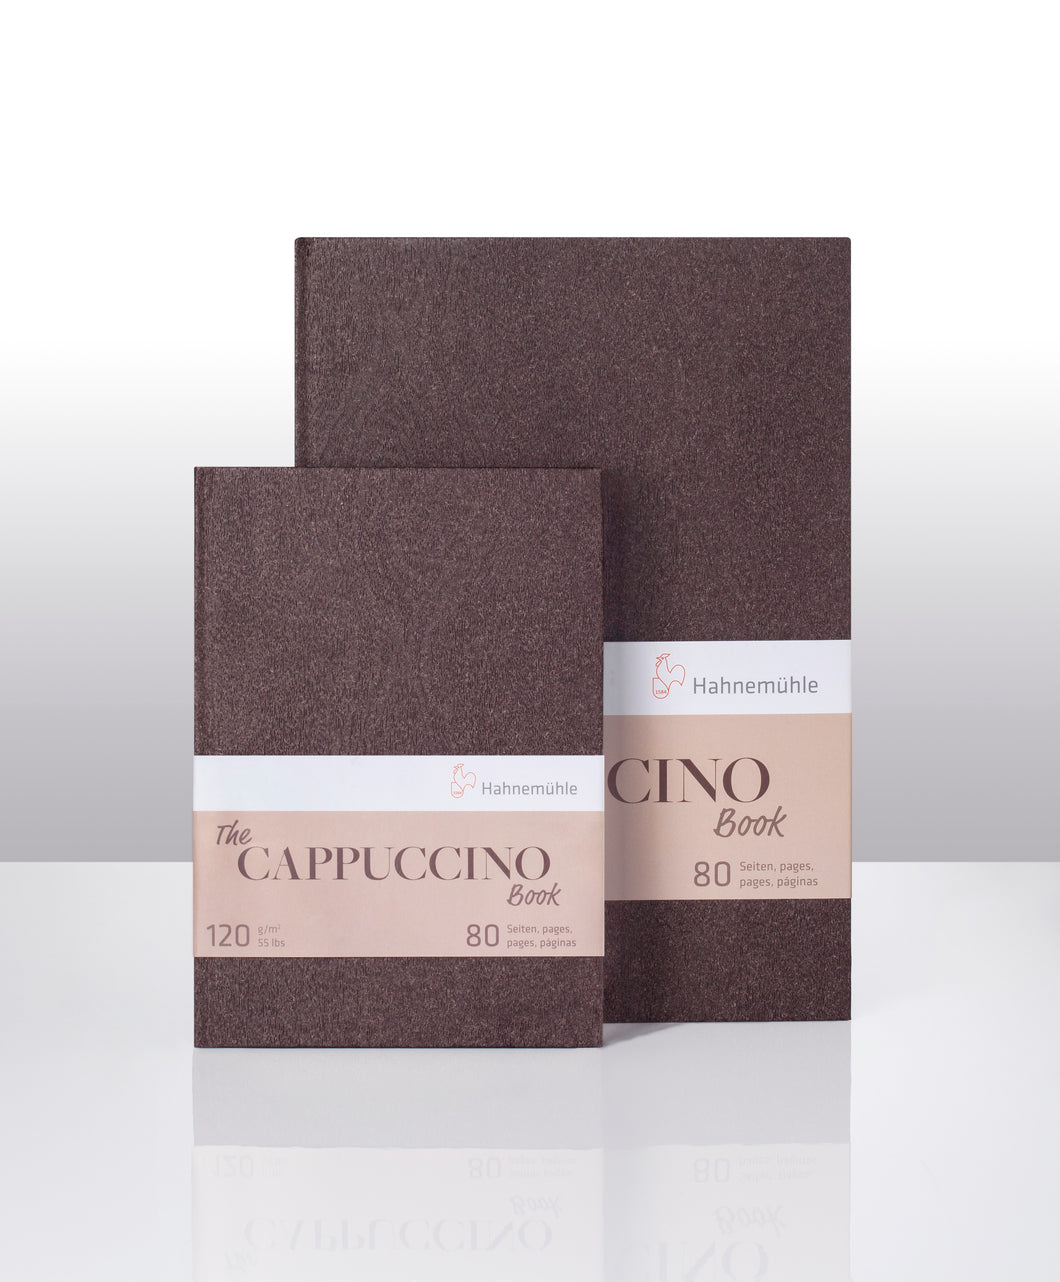 The Cappuccino Book 120 gsm